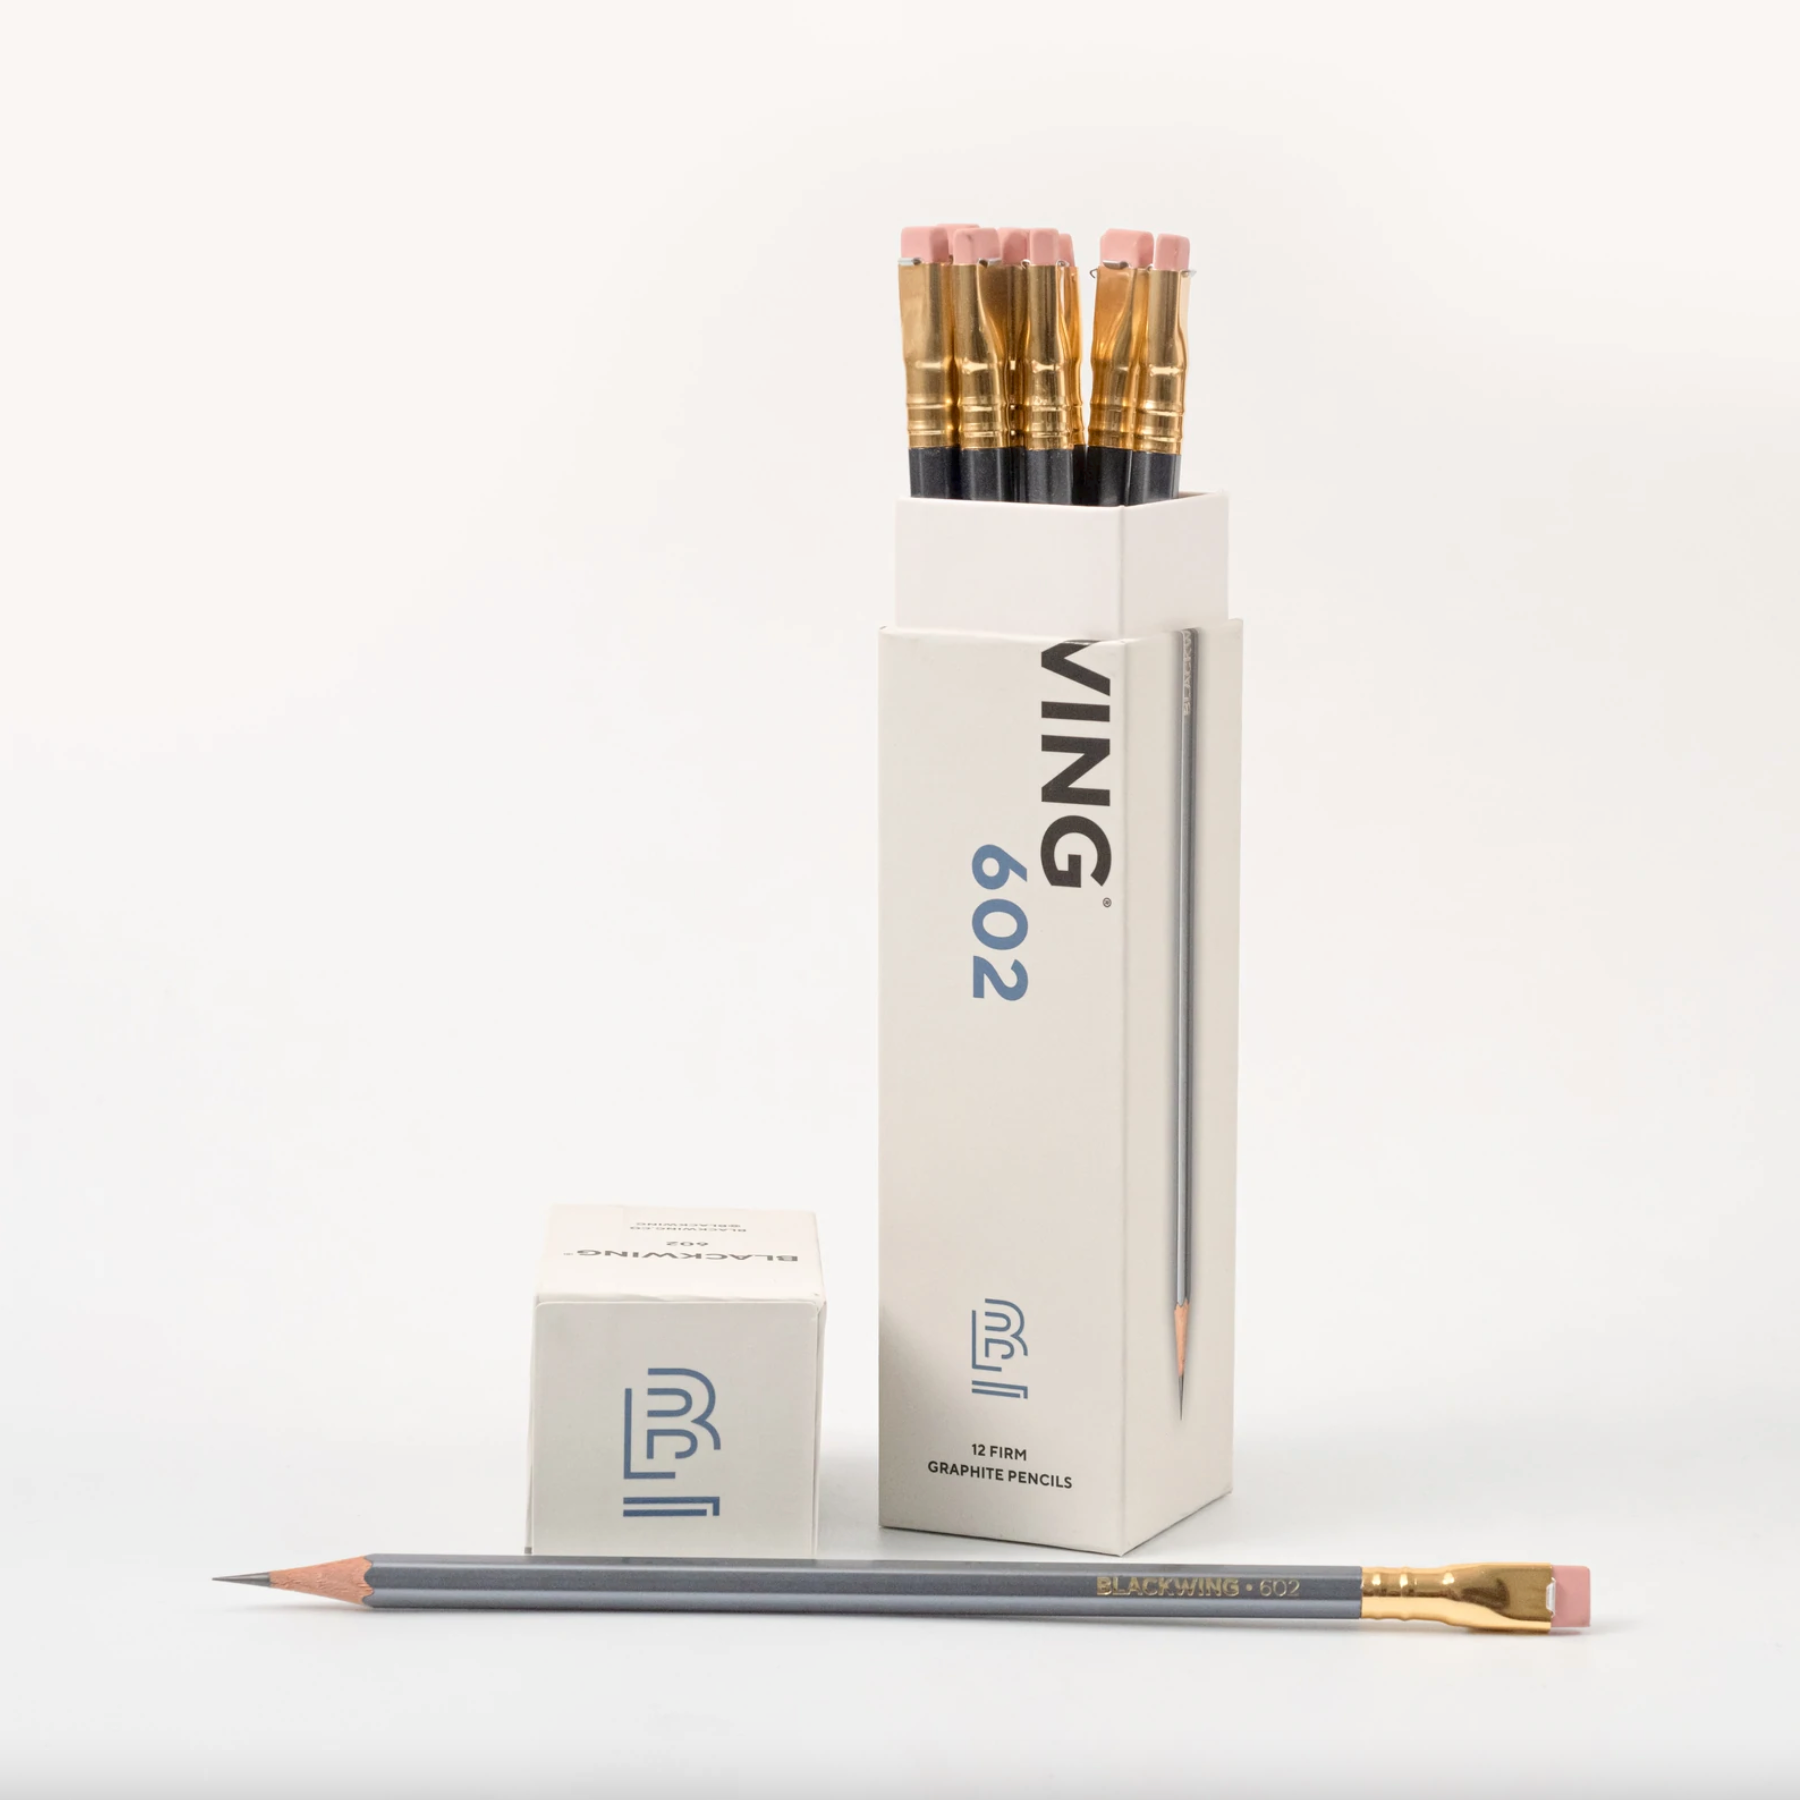 Palomino Blackwing - 602 Pencil (Firm) - Box of 12 - by Blackwing - K. A. Artist Shop